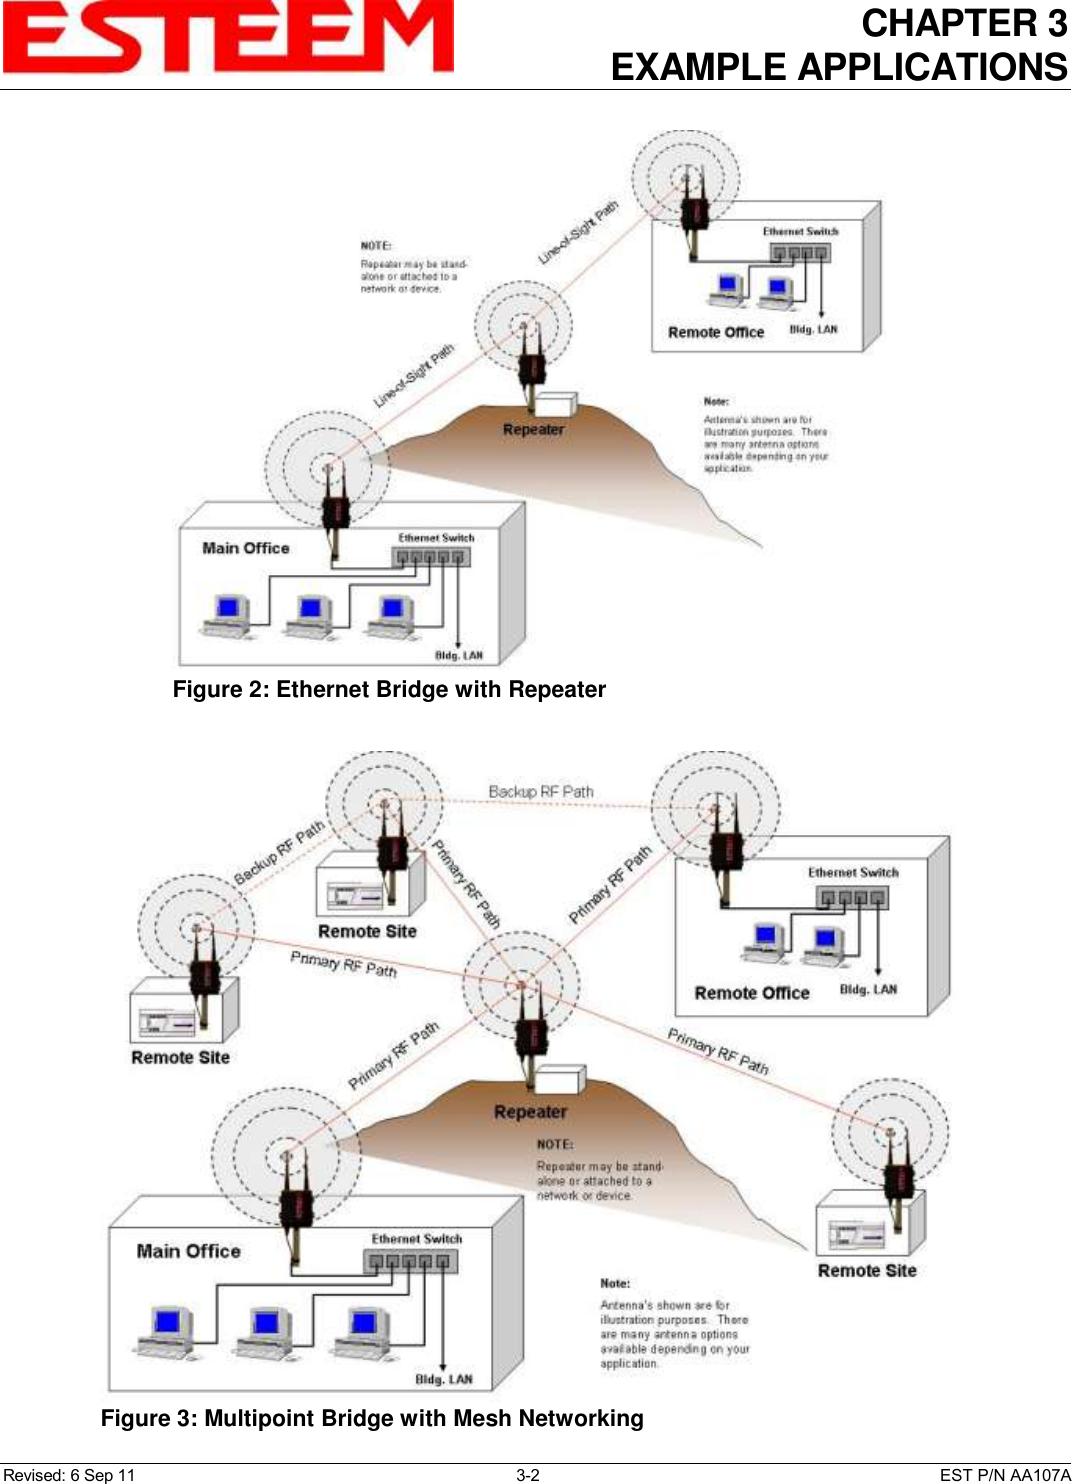 CHAPTER 3 EXAMPLE APPLICATIONS  Revised: 6 Sep 11  3-2  EST P/N AA107A  Figure 3: Multipoint Bridge with Mesh Networking   Figure 2: Ethernet Bridge with Repeater  